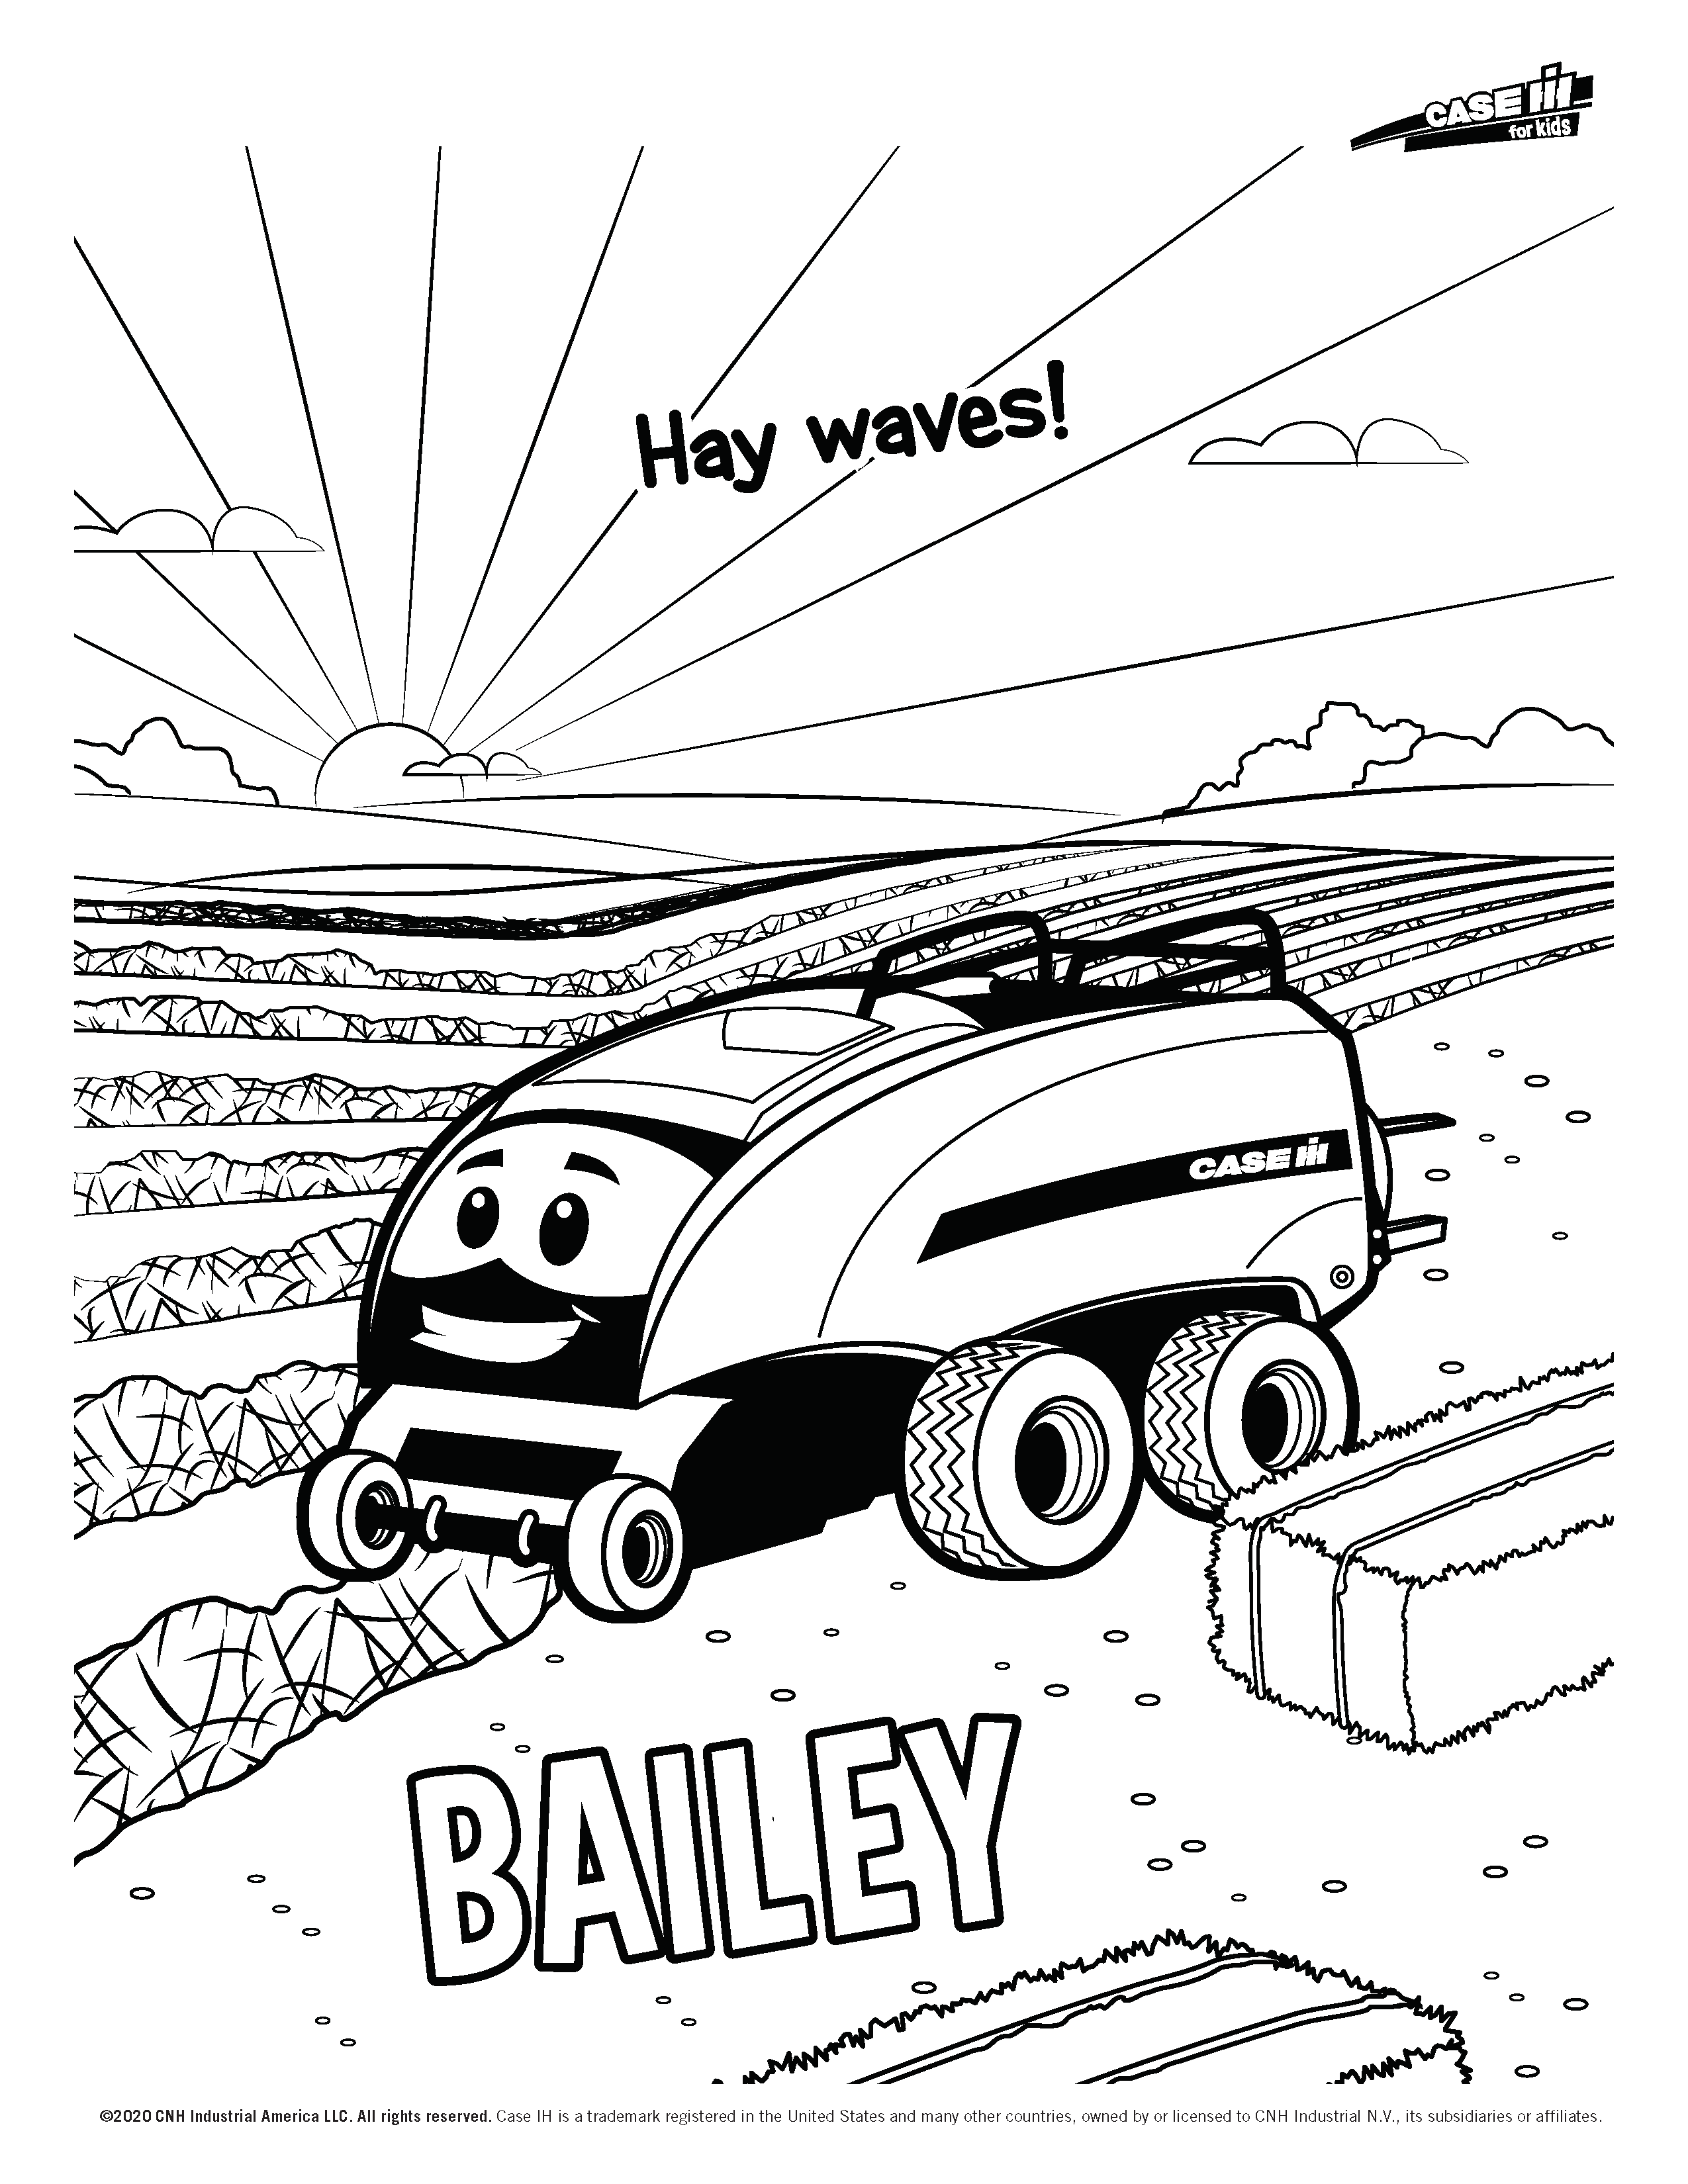 Casey and Friends_Bailey_02.png